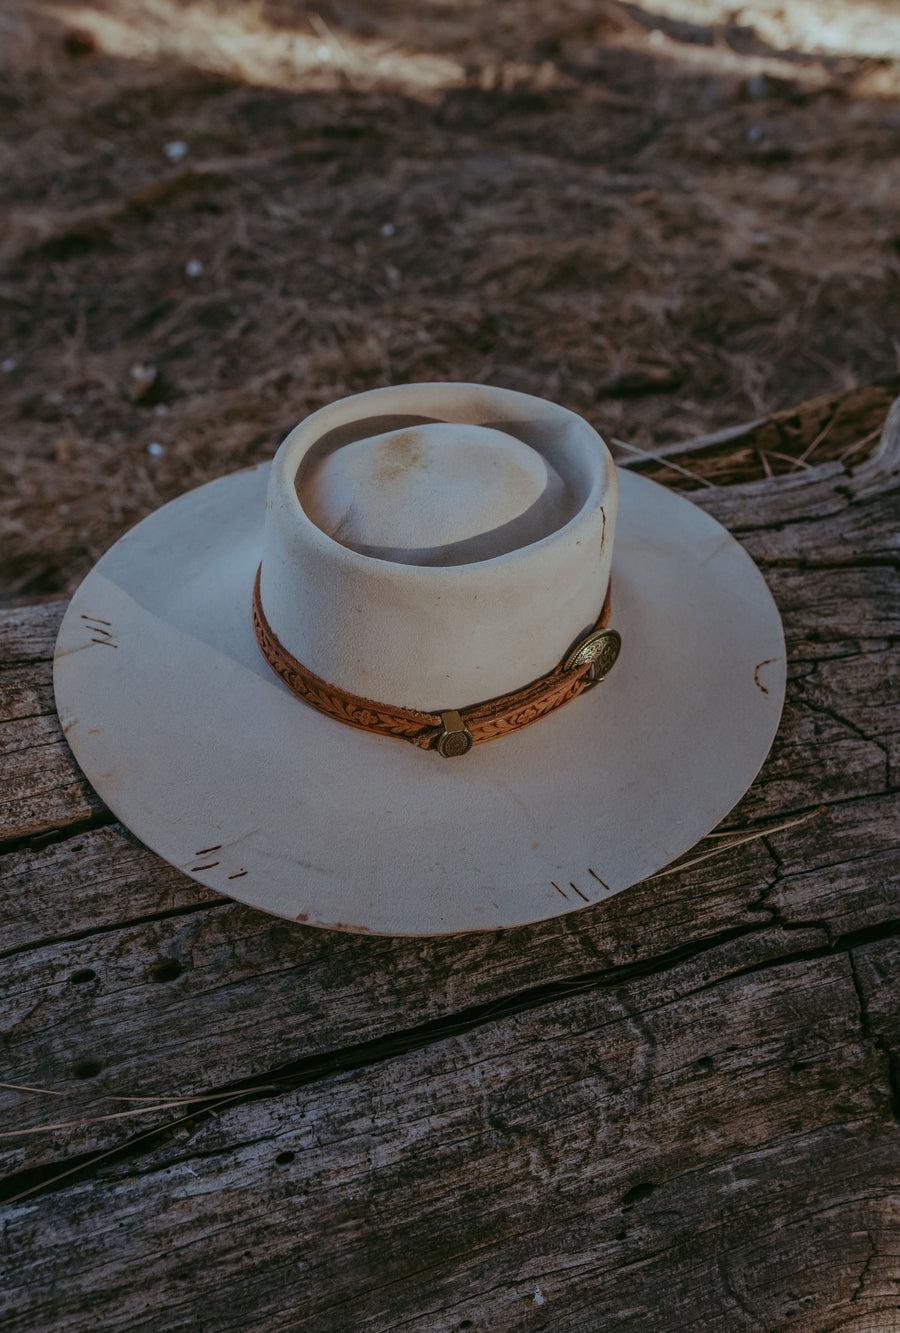 The Outlaw Wide Brim Hat